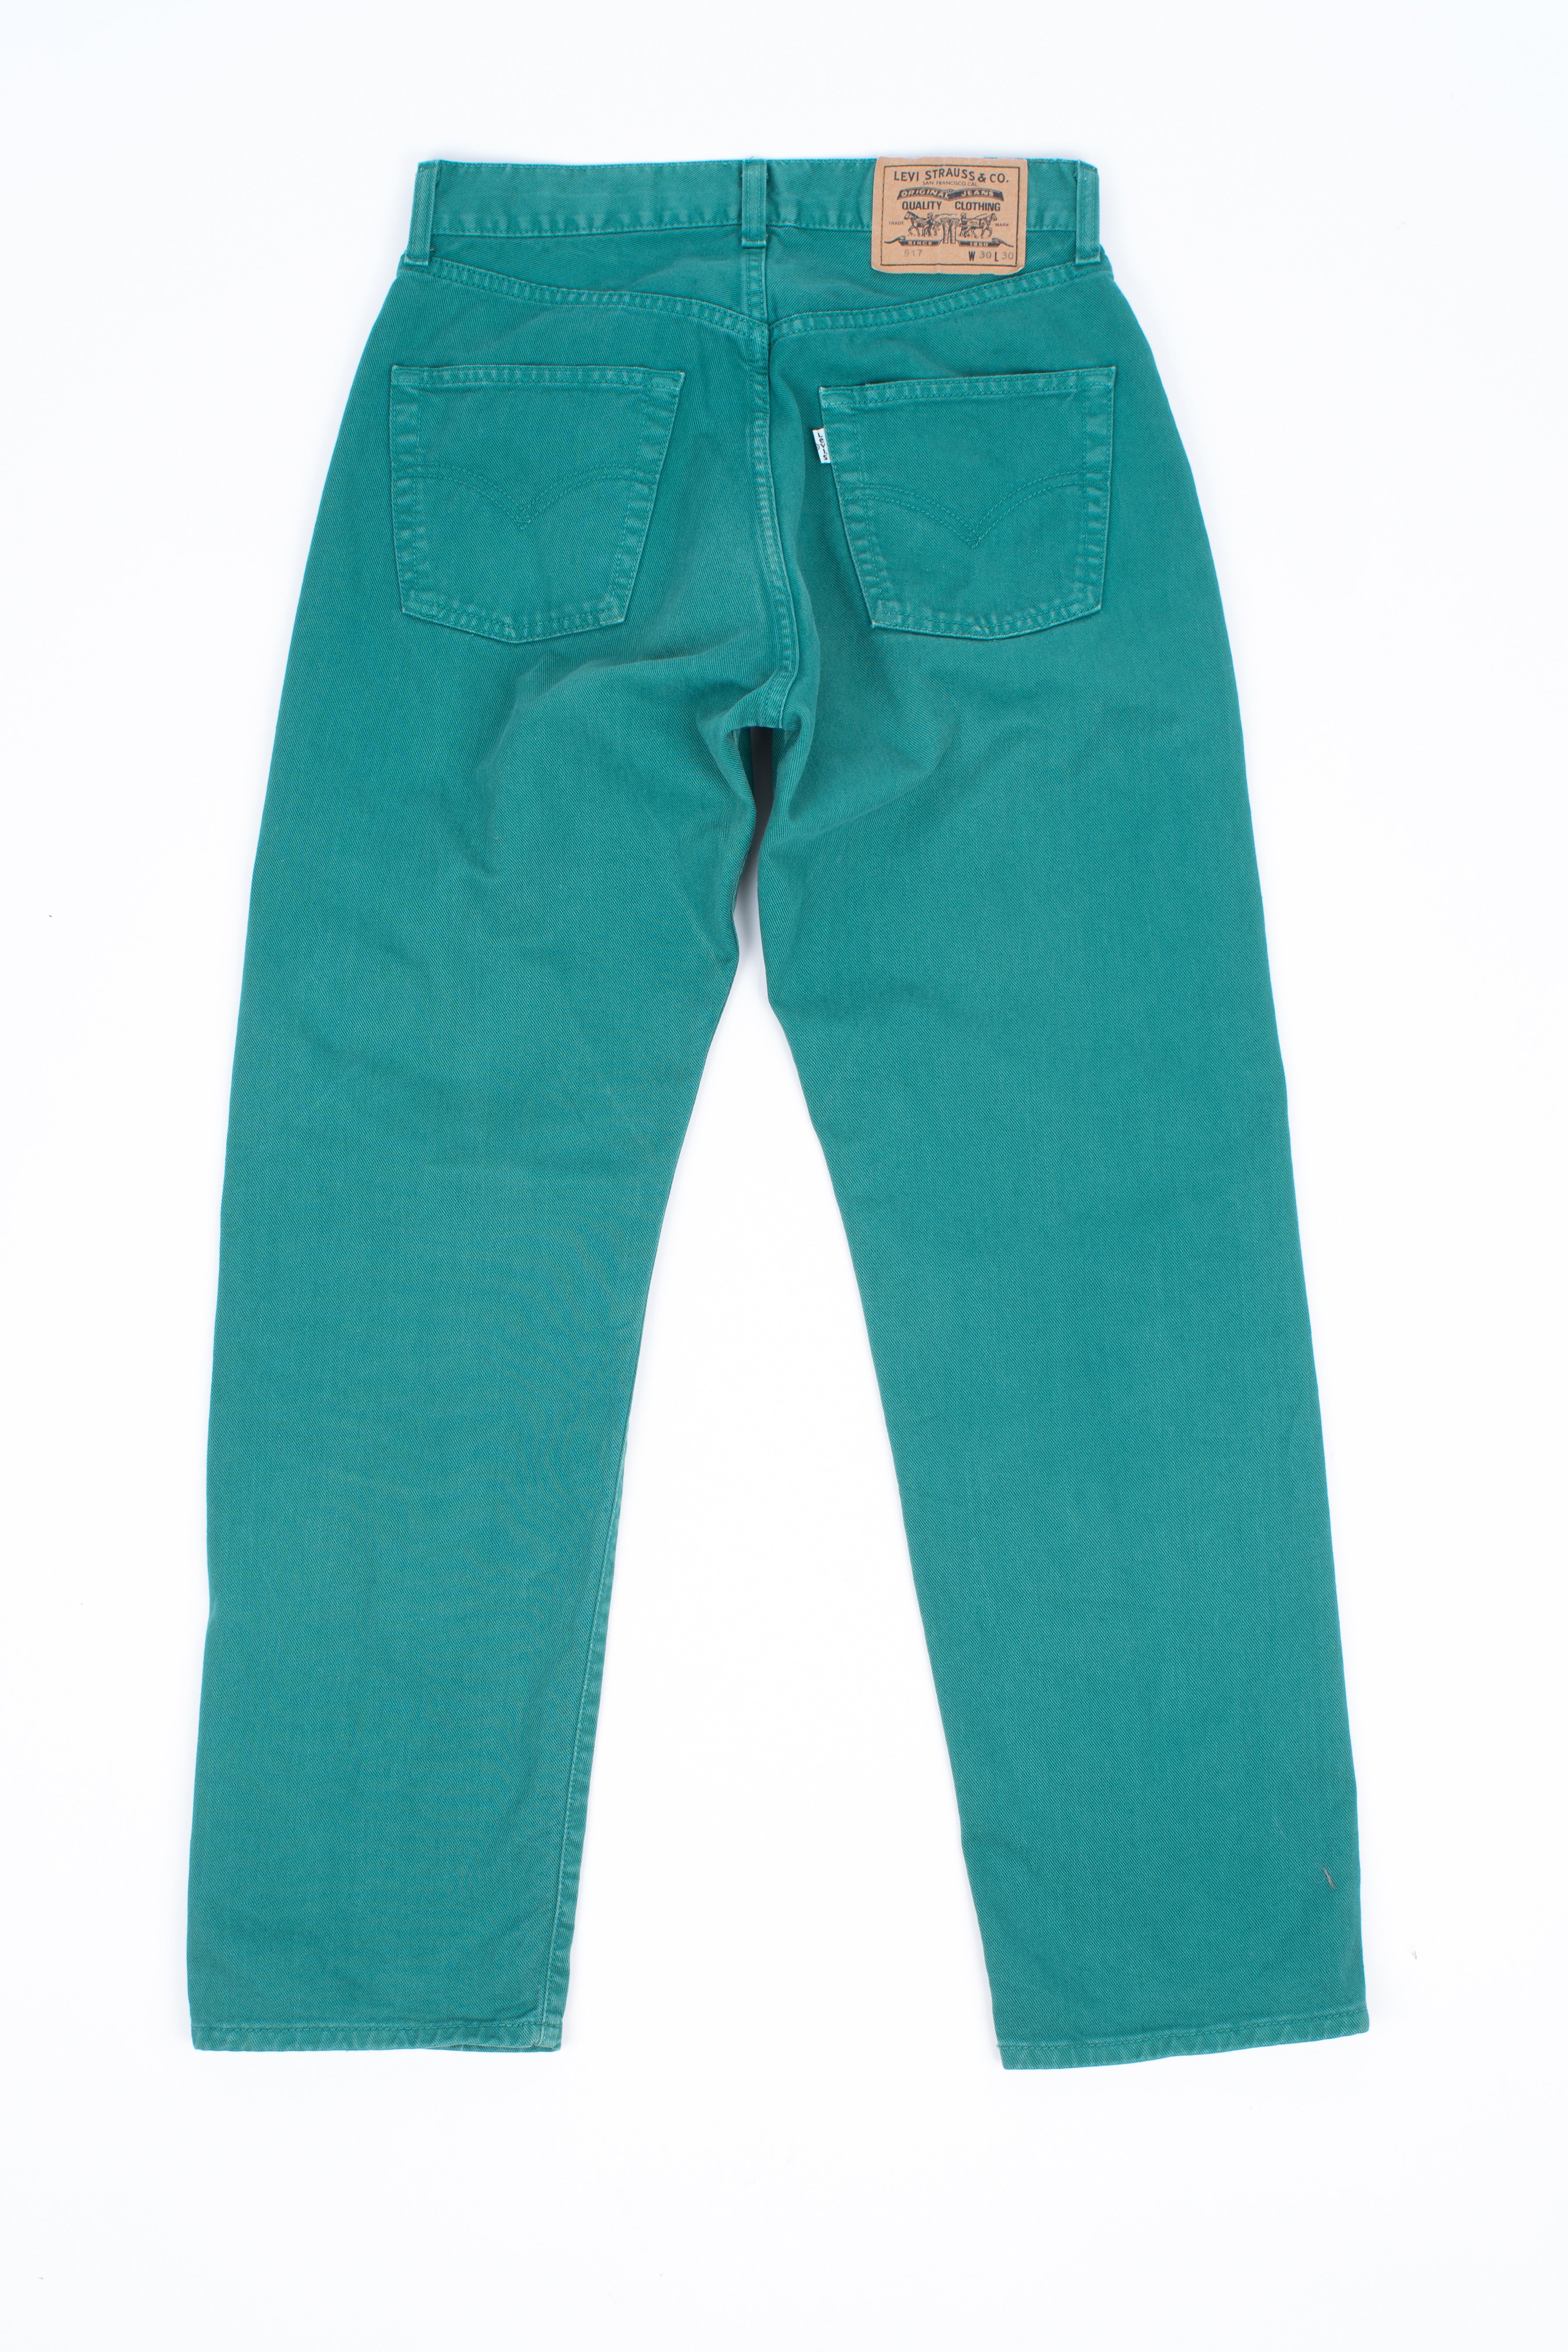 Levi's 517 White Tab Vintage Green Jeans Made in Italy, W30/L30 –  SecondFirst